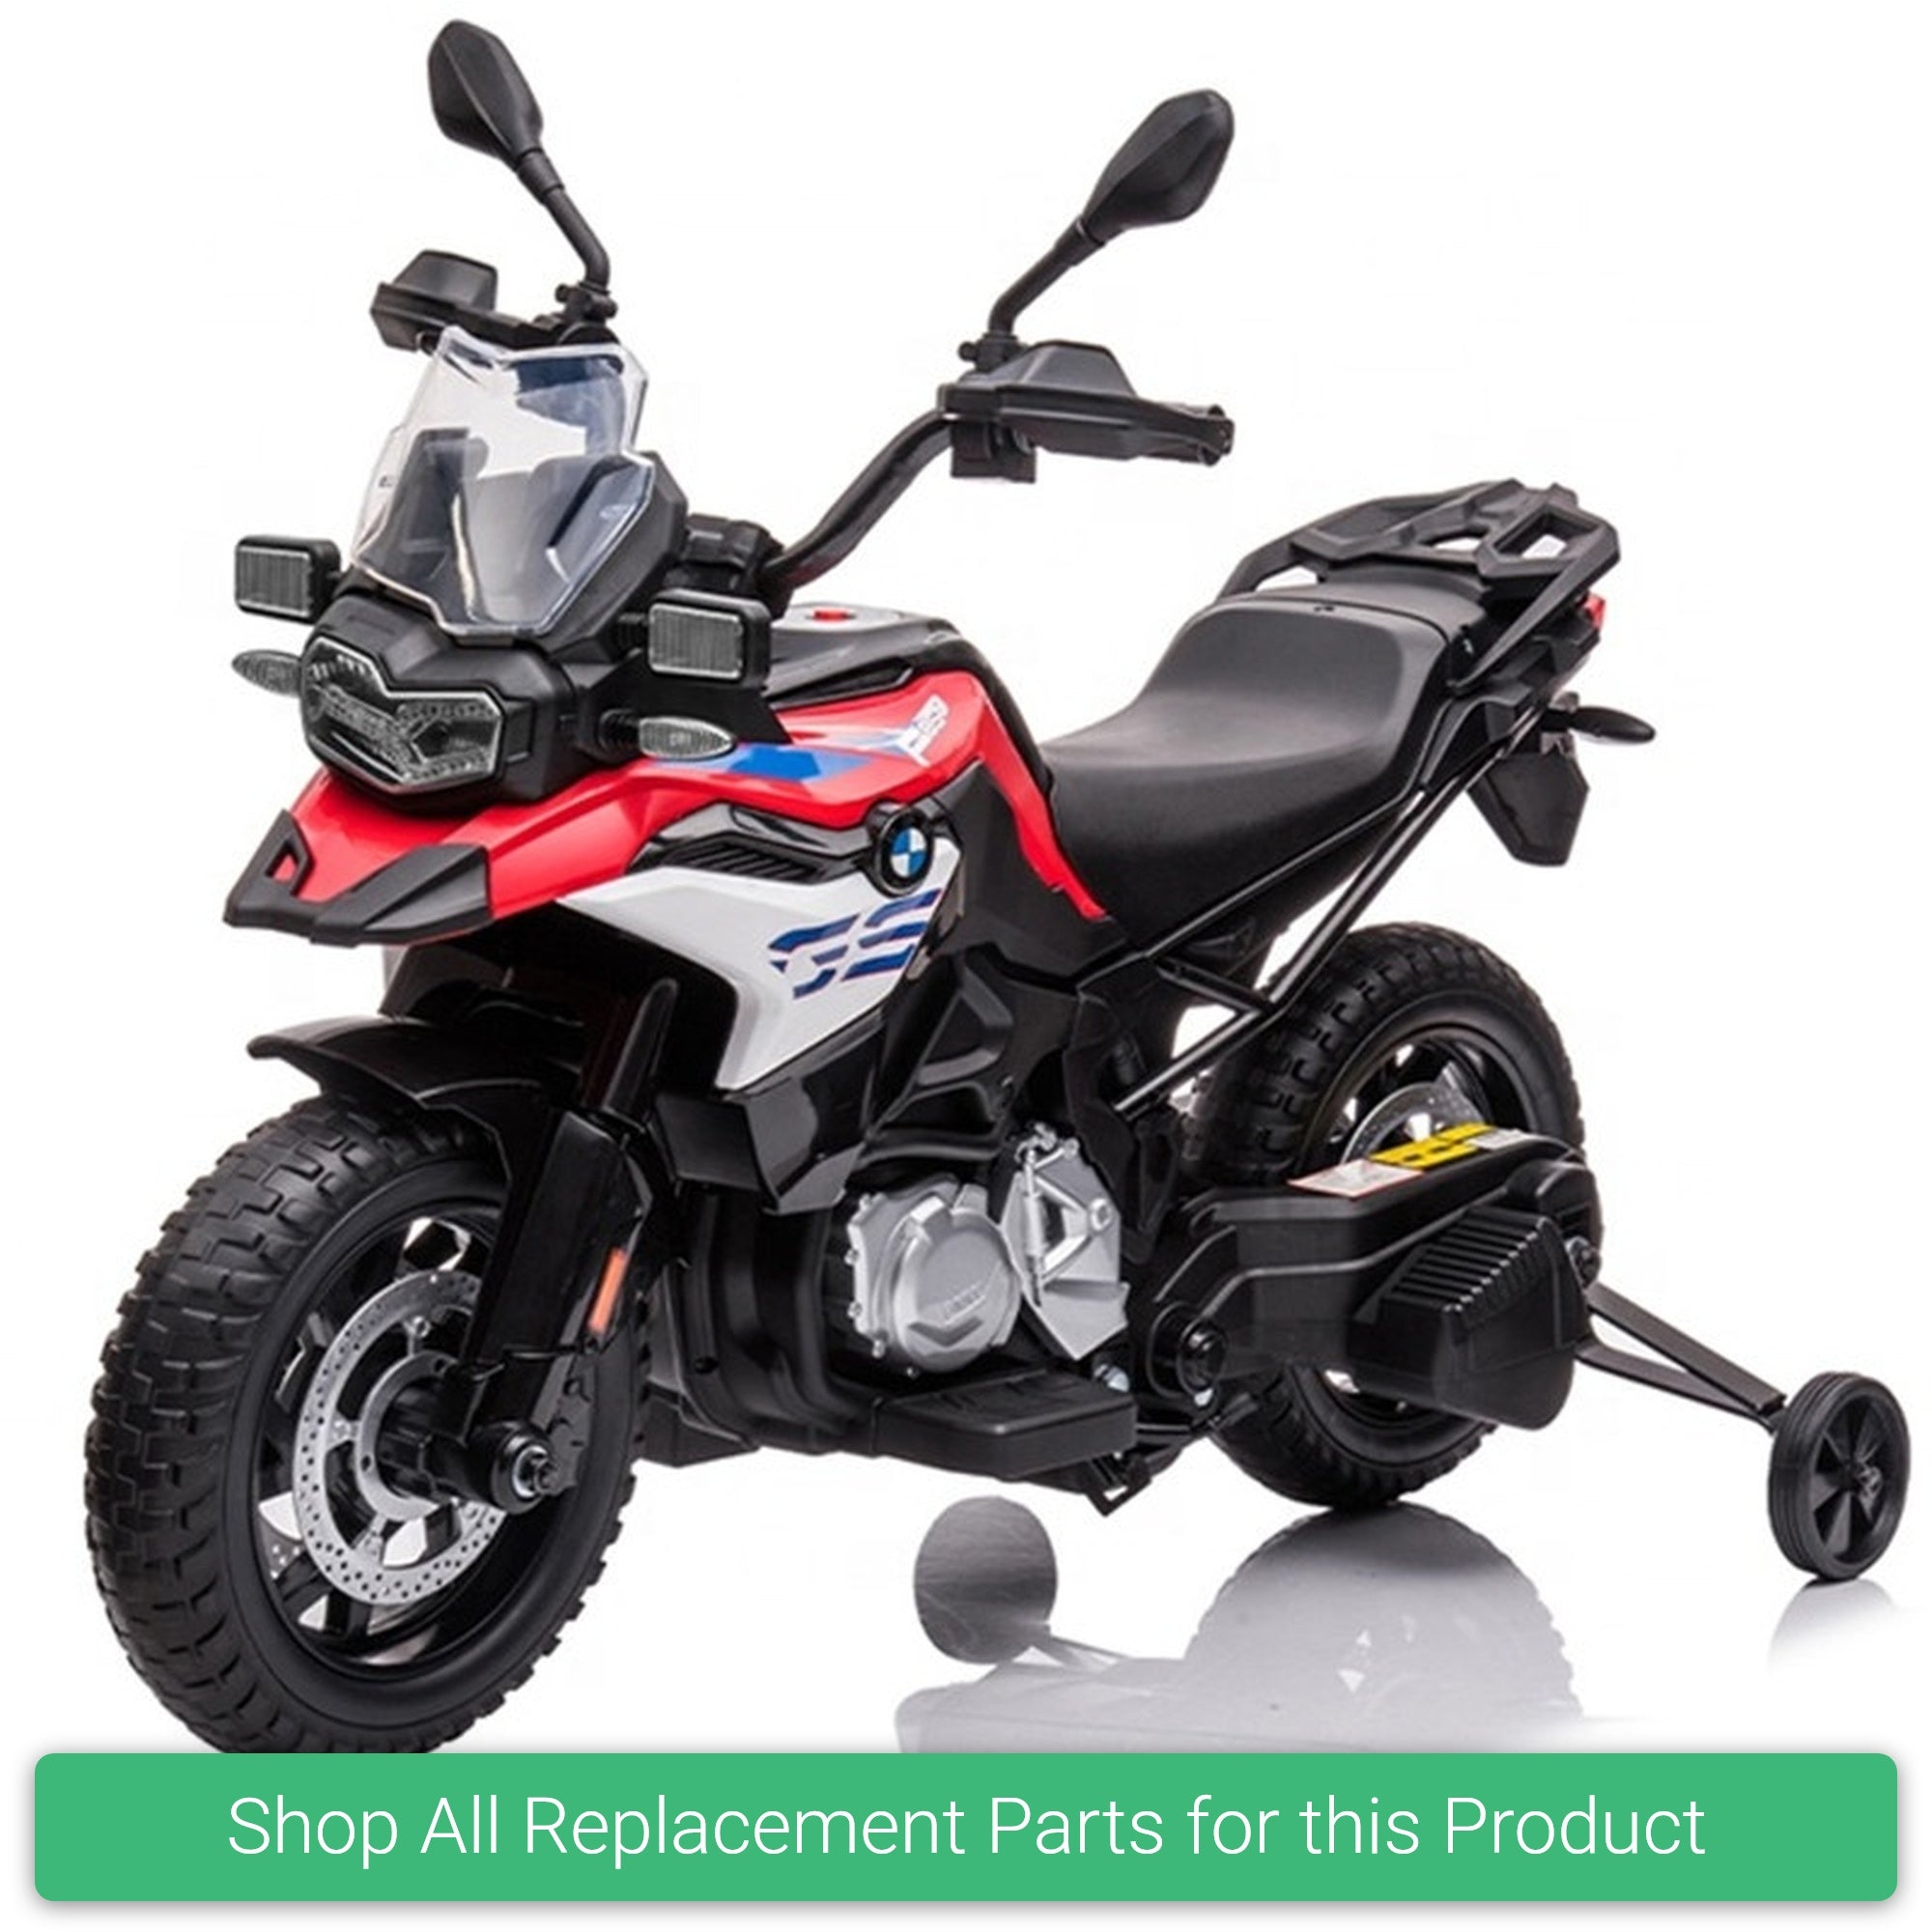 Replacement Parts and Spares for Kids BMW F850 GS Motorbike - BMW-F850-POL - JT5002B